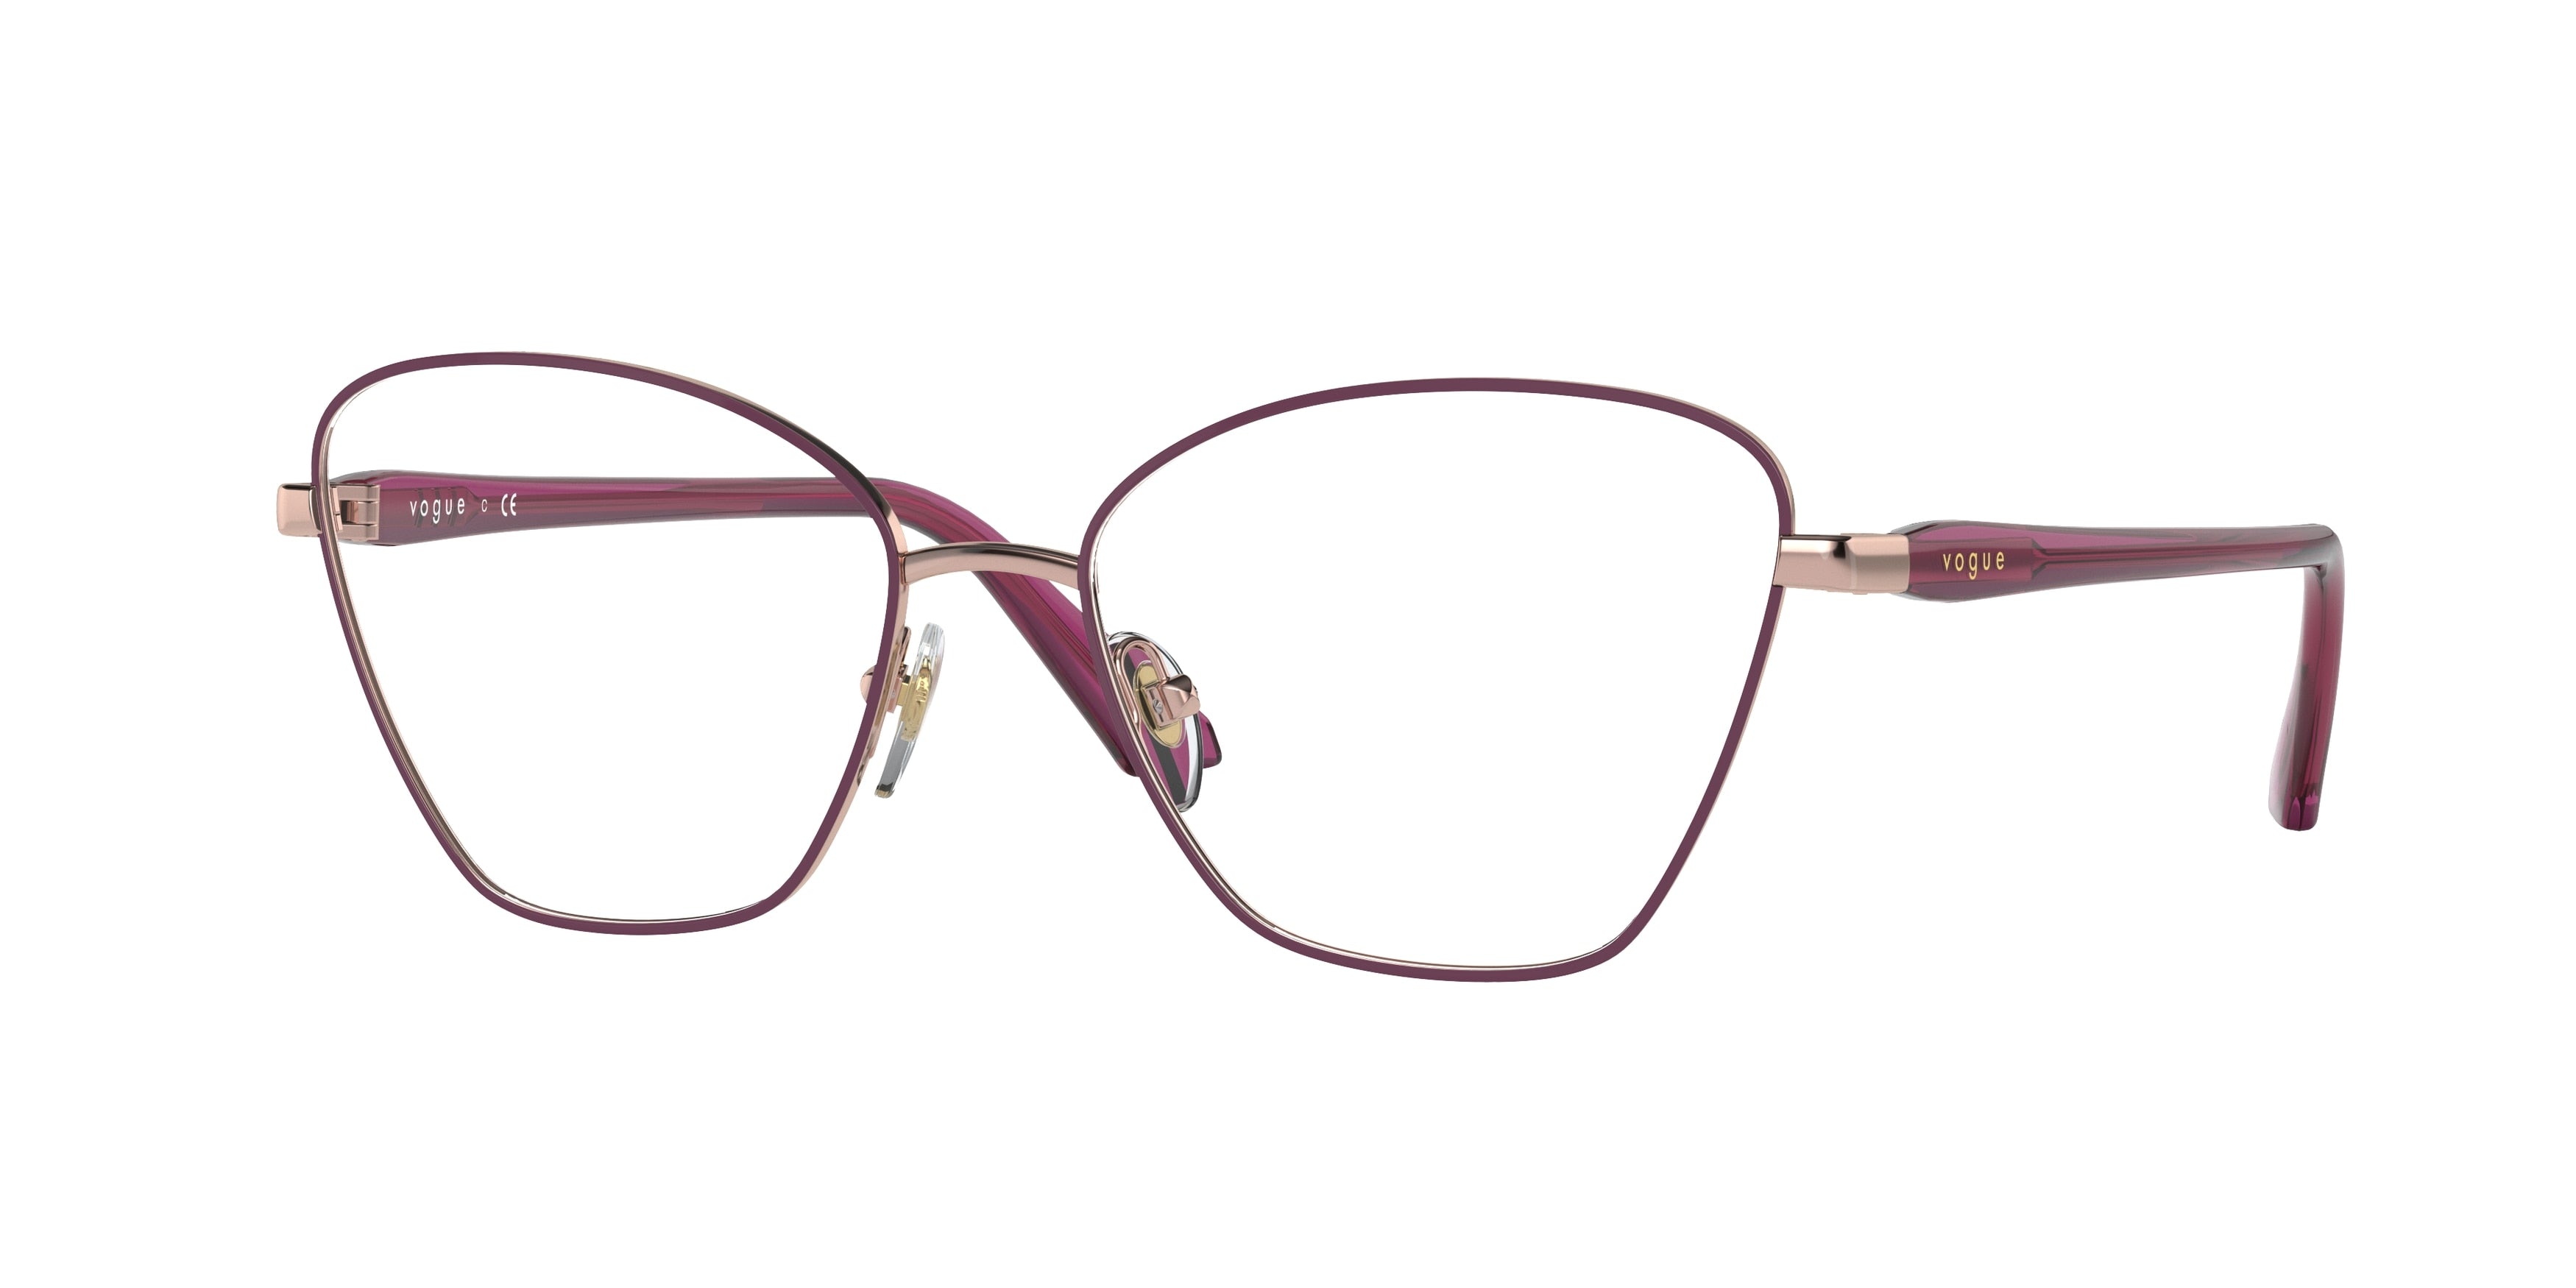 Vogue VO4195 Butterfly Eyeglasses  5089-Bordeaux/Gold Pink 52-140-16 - Color Map Red